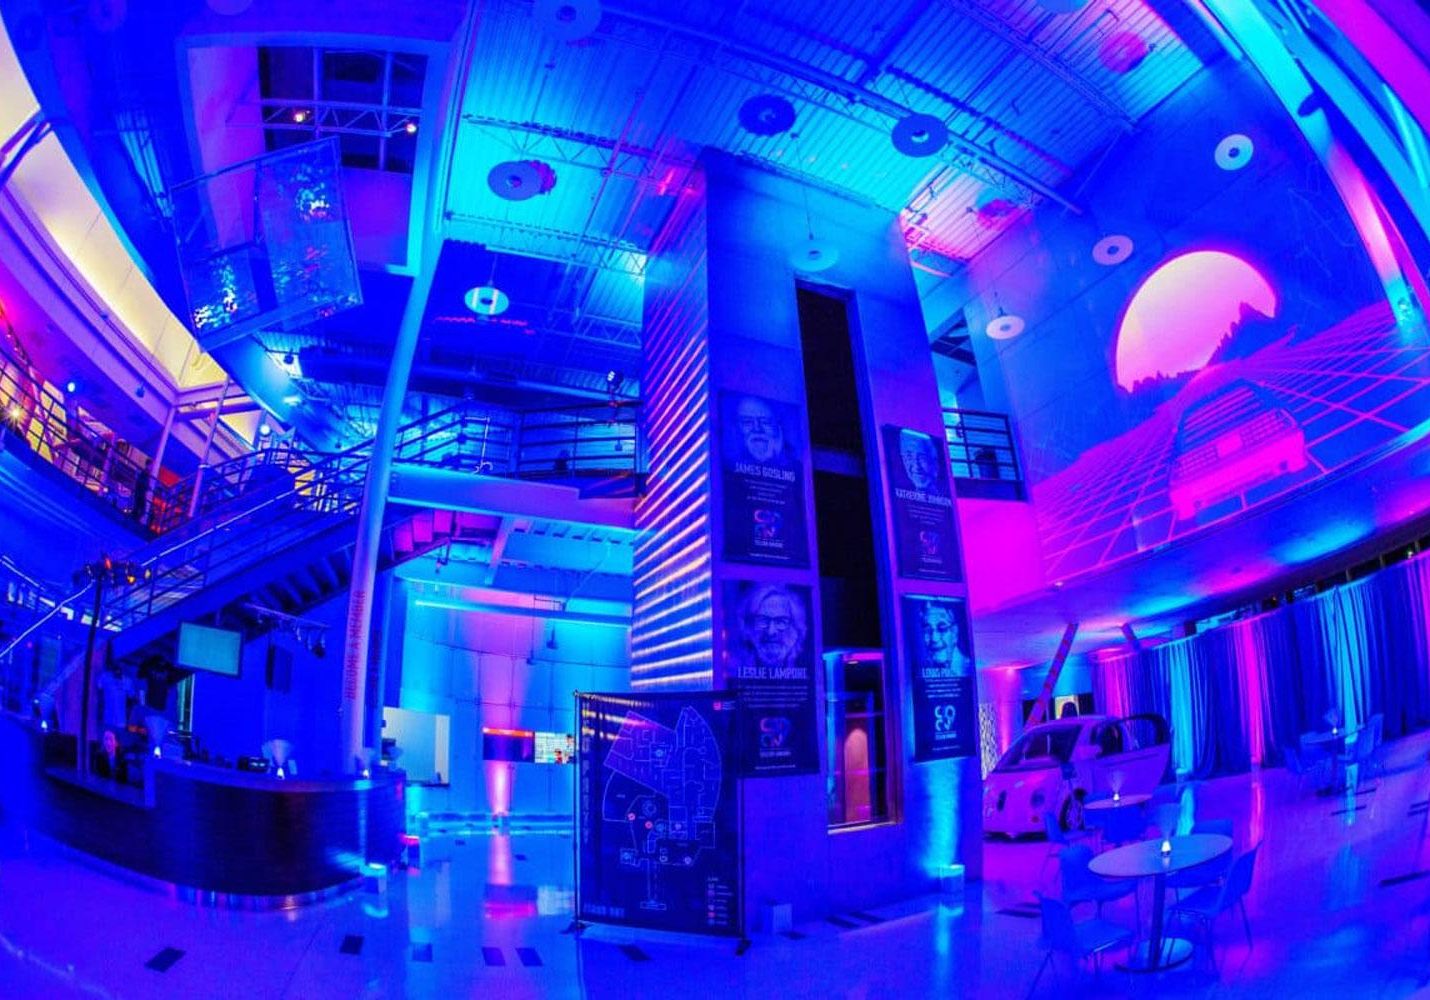 image of a beautiful event space with blue and pink tones